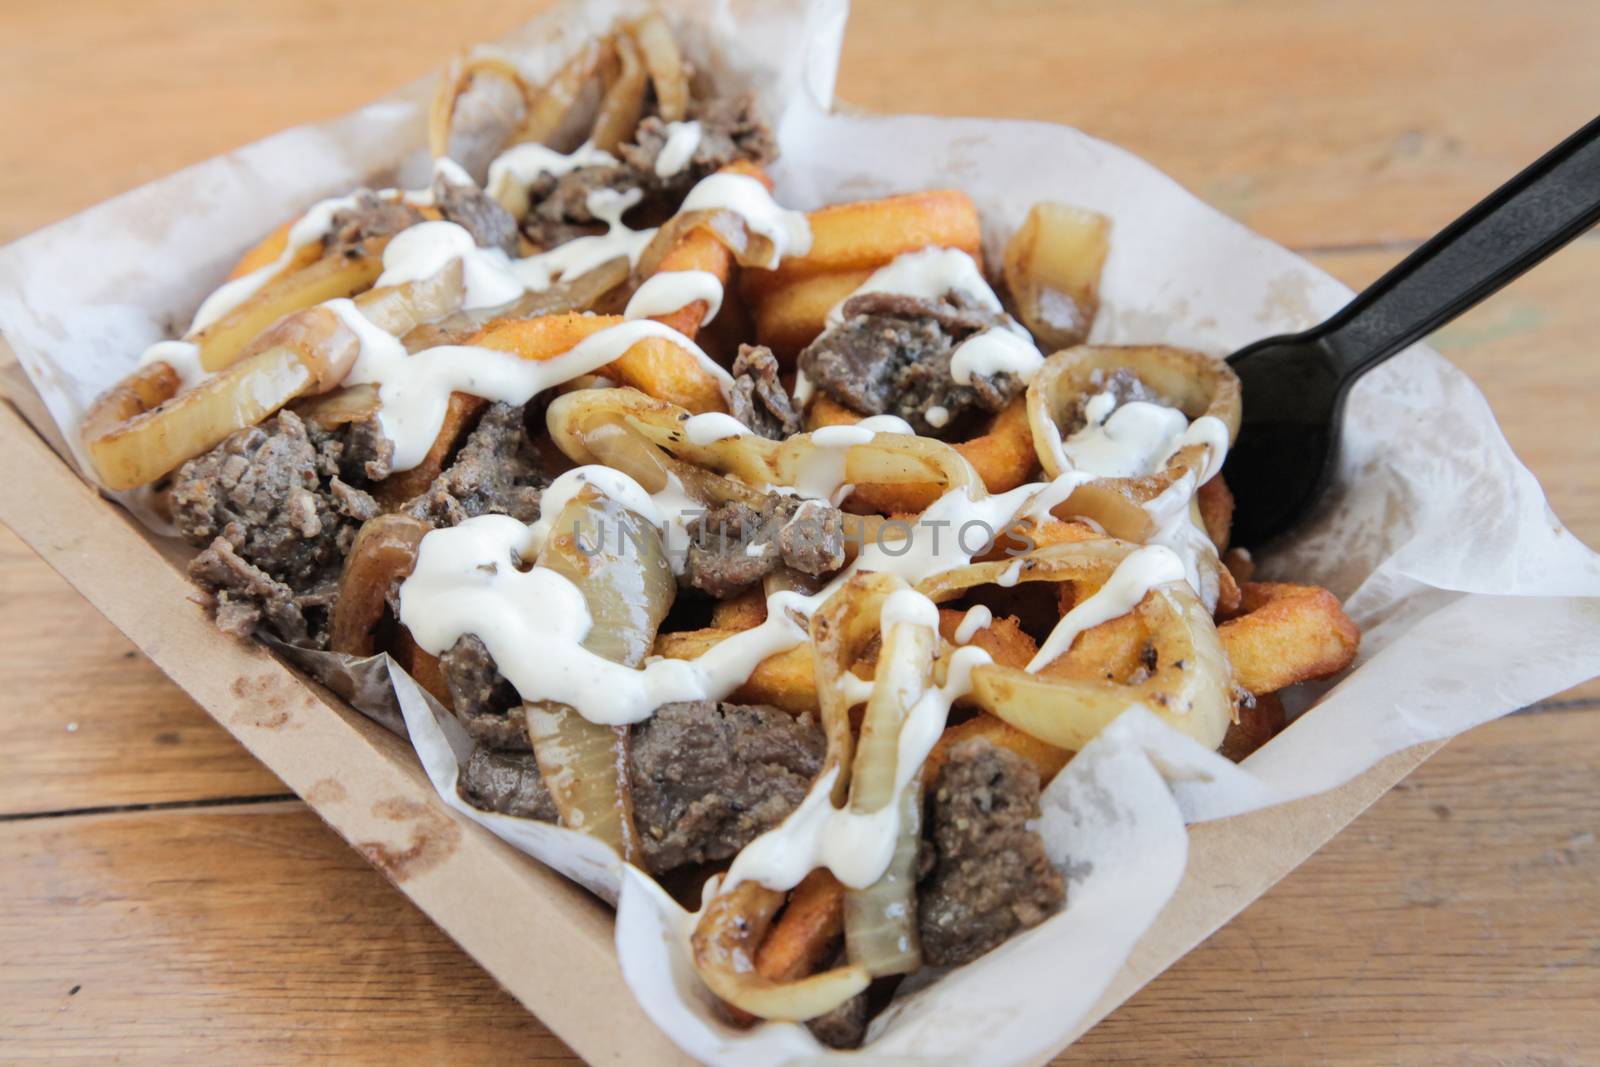 Poutine Curly fries with beef meat topped with cheese and mayo

